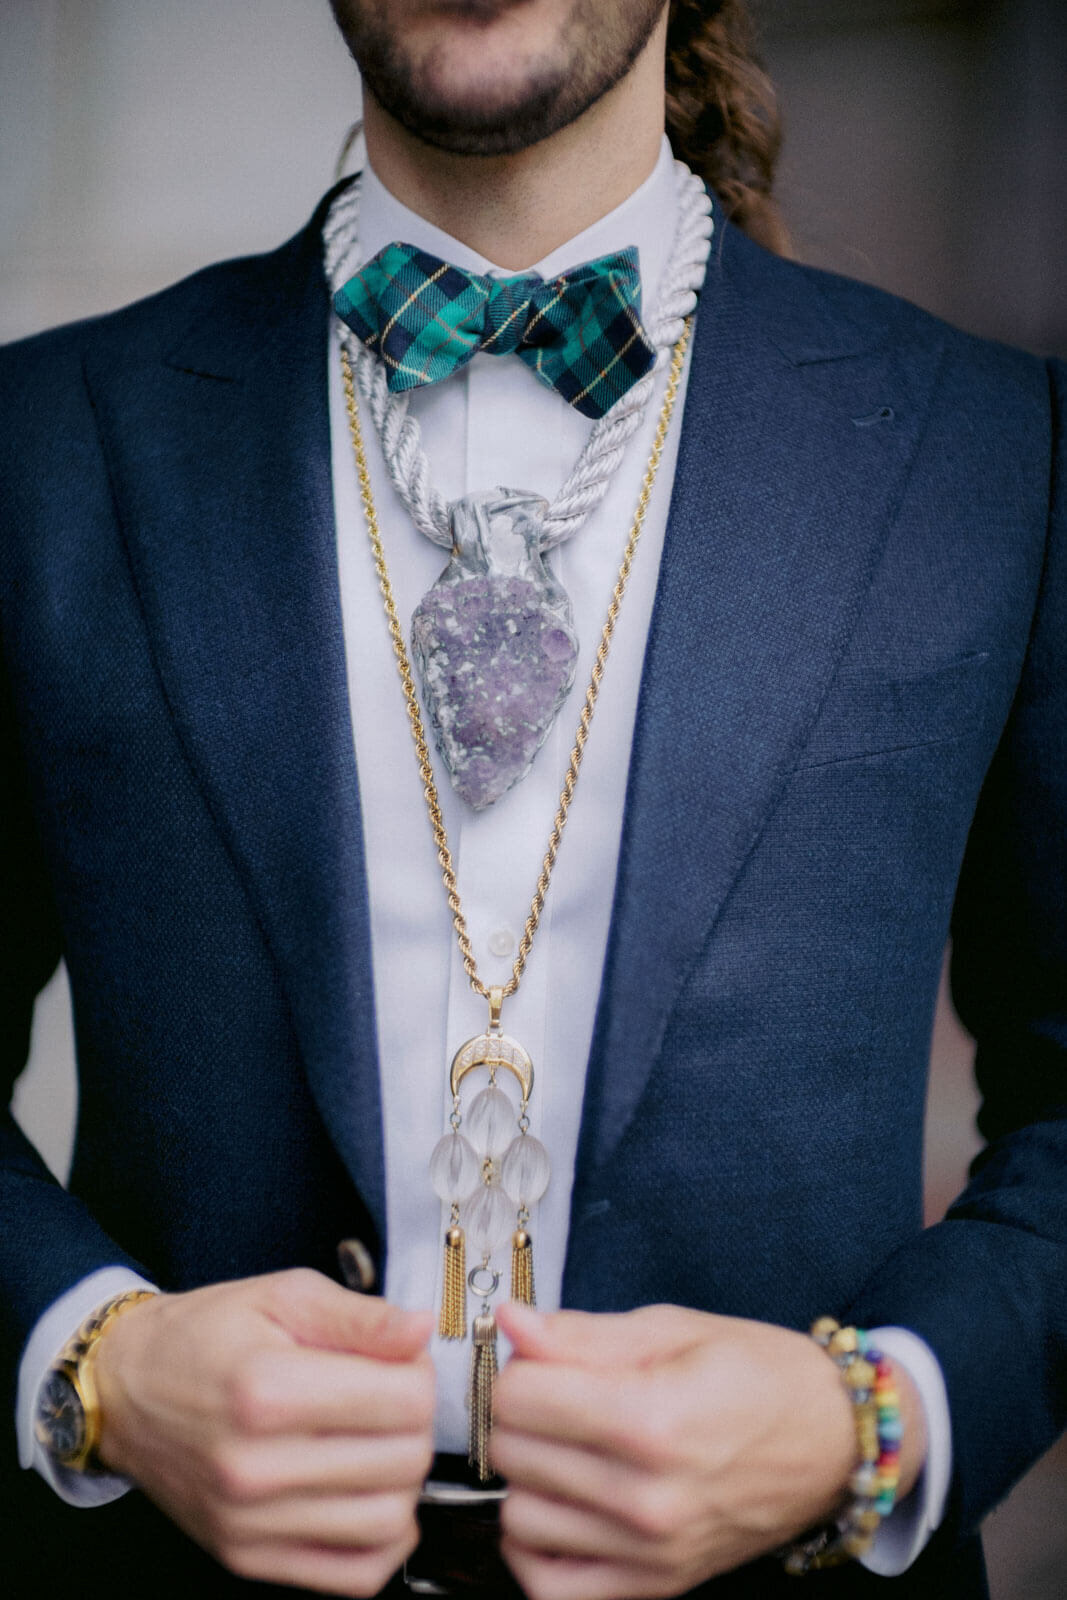 The groom, is wearing a black suit, checkered turquoise bow tie, necklaces, and bracelets in NYC City Hall. Image by Jenny Fu Studio